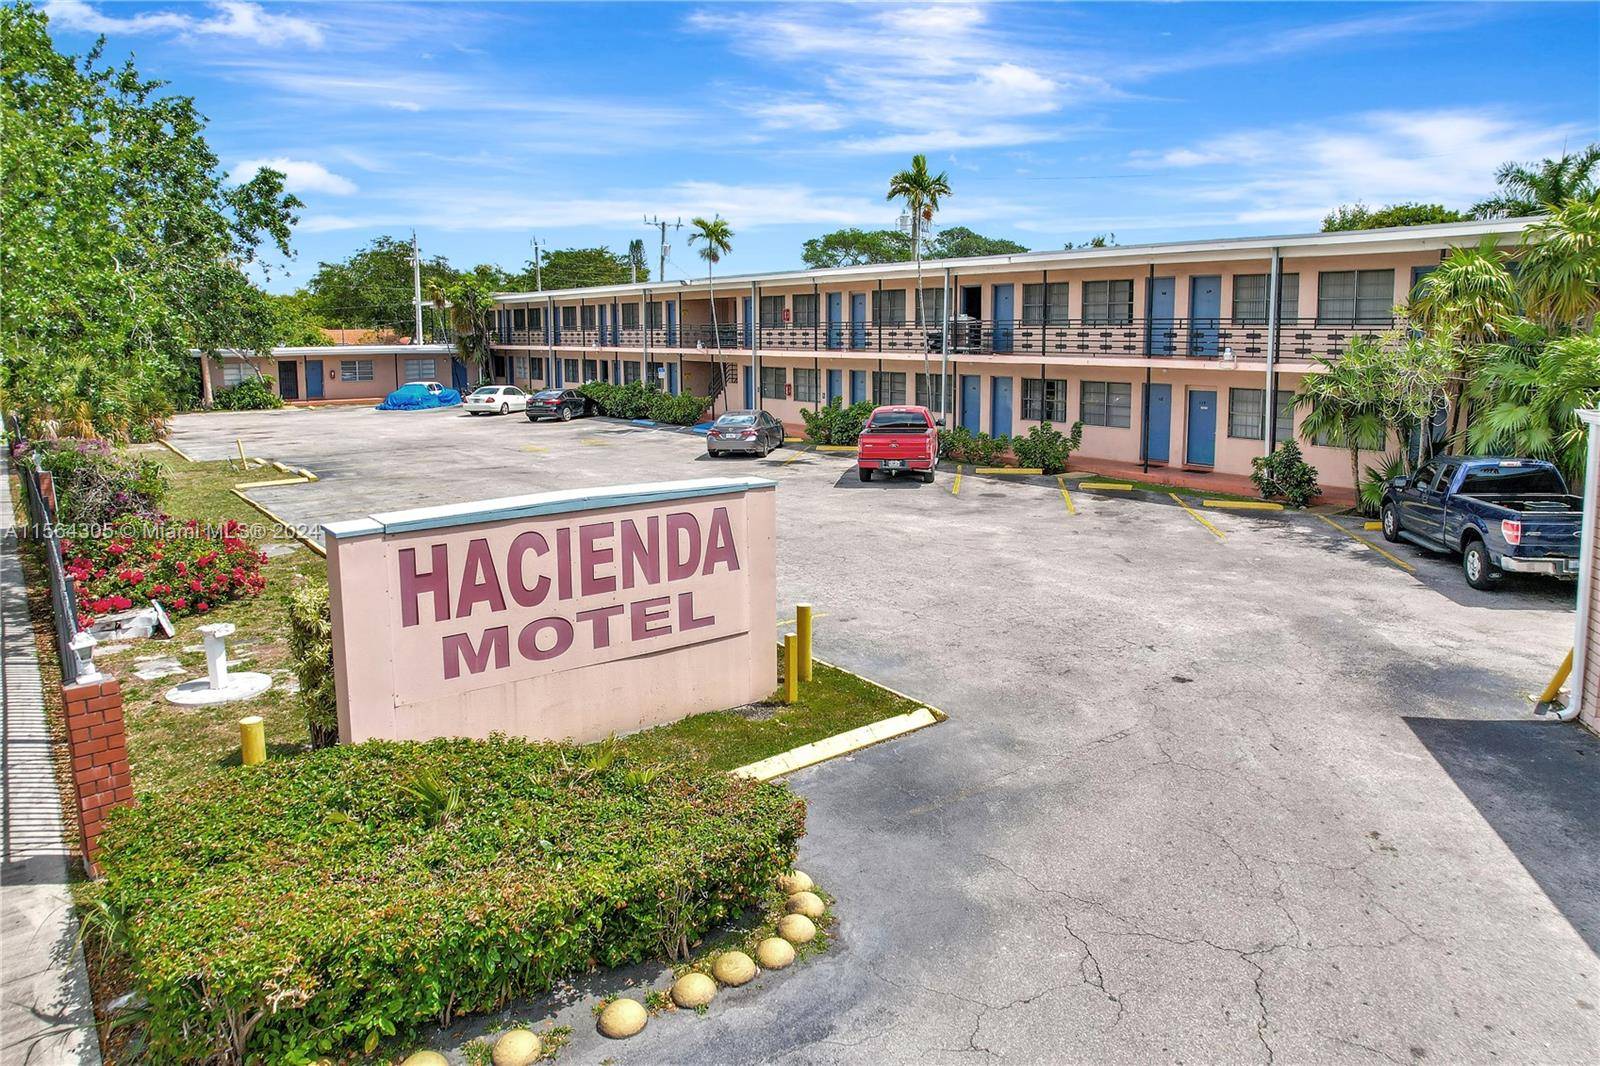 Compelling investment opportunity to acquire La Hacienda Motel, featuring 39 rooms in the vibrant city of Miami Shores.